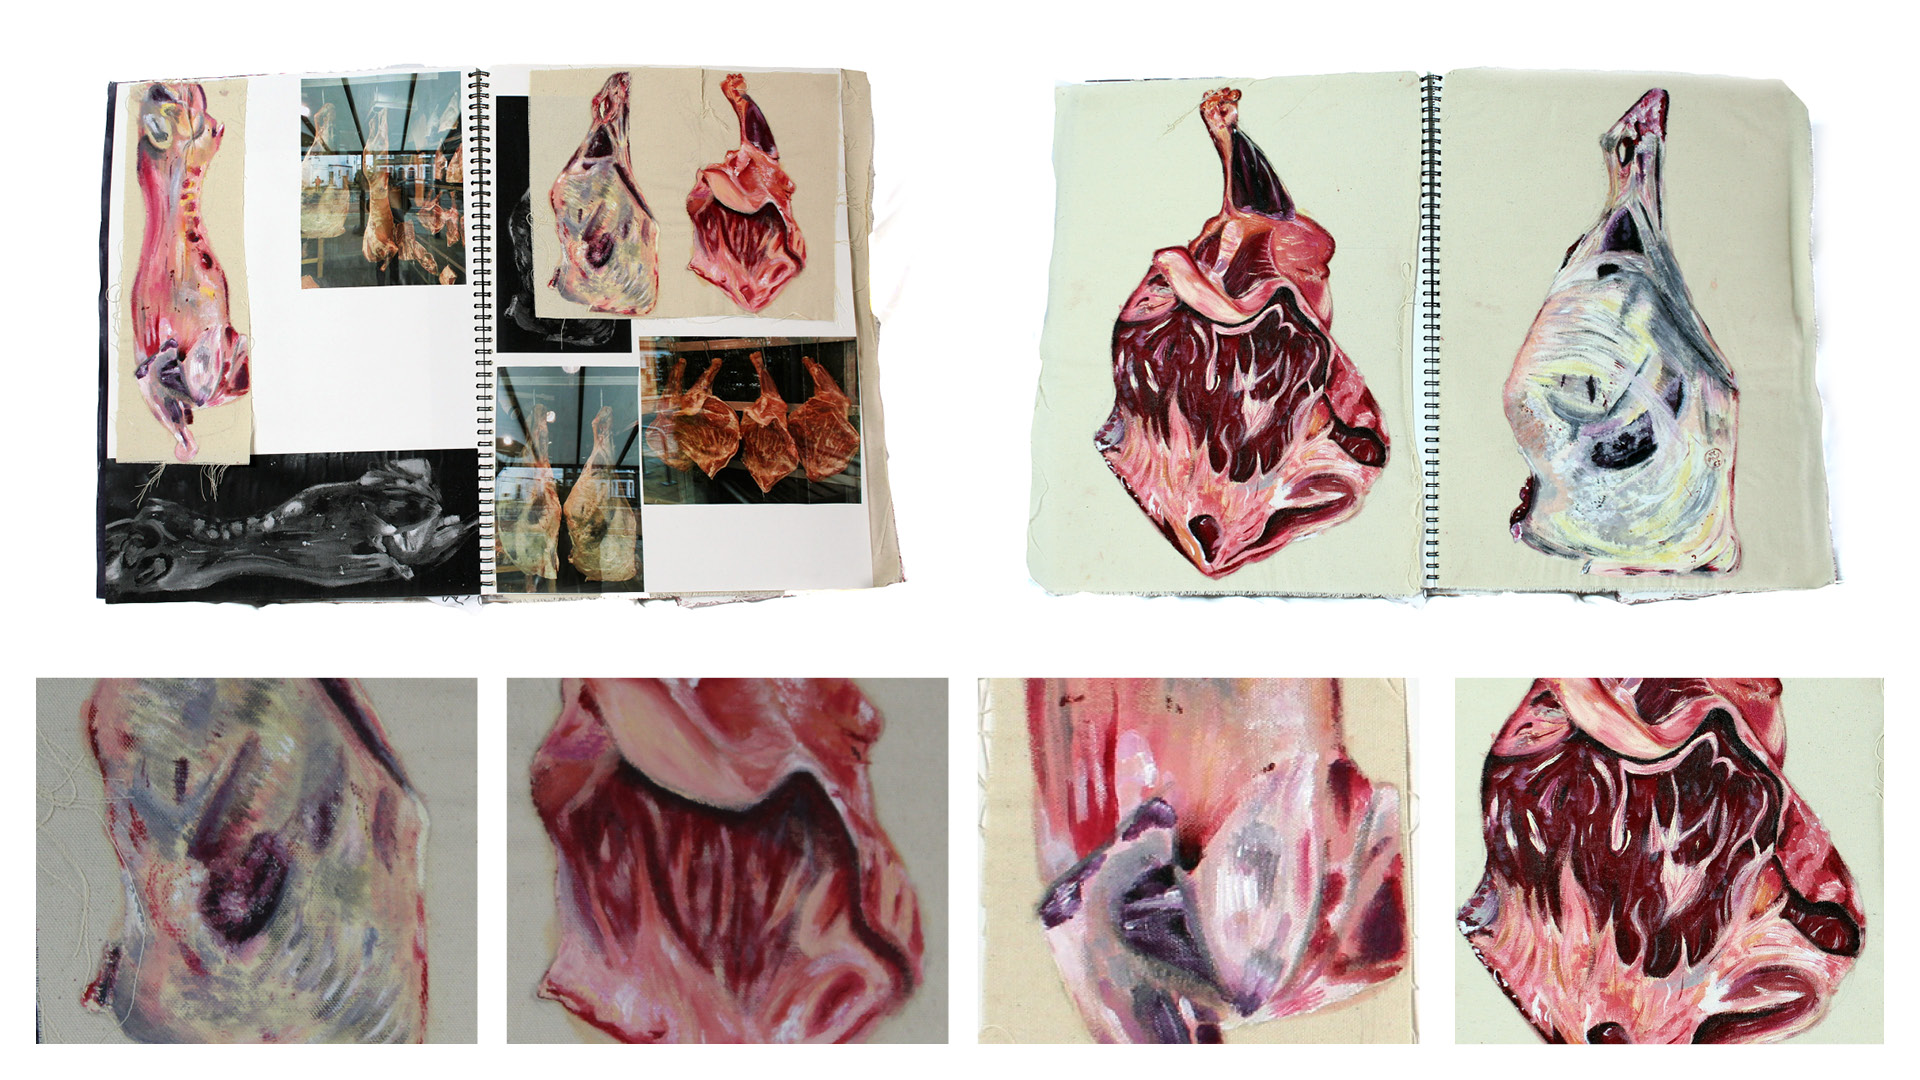 CSM Portfolio P9: Decay project - Experimentation in the lead up to the final piece taking the concept of flesh and death further by focusing it on a butchers shop window to make reference to the commercialization of the consumption of meat.